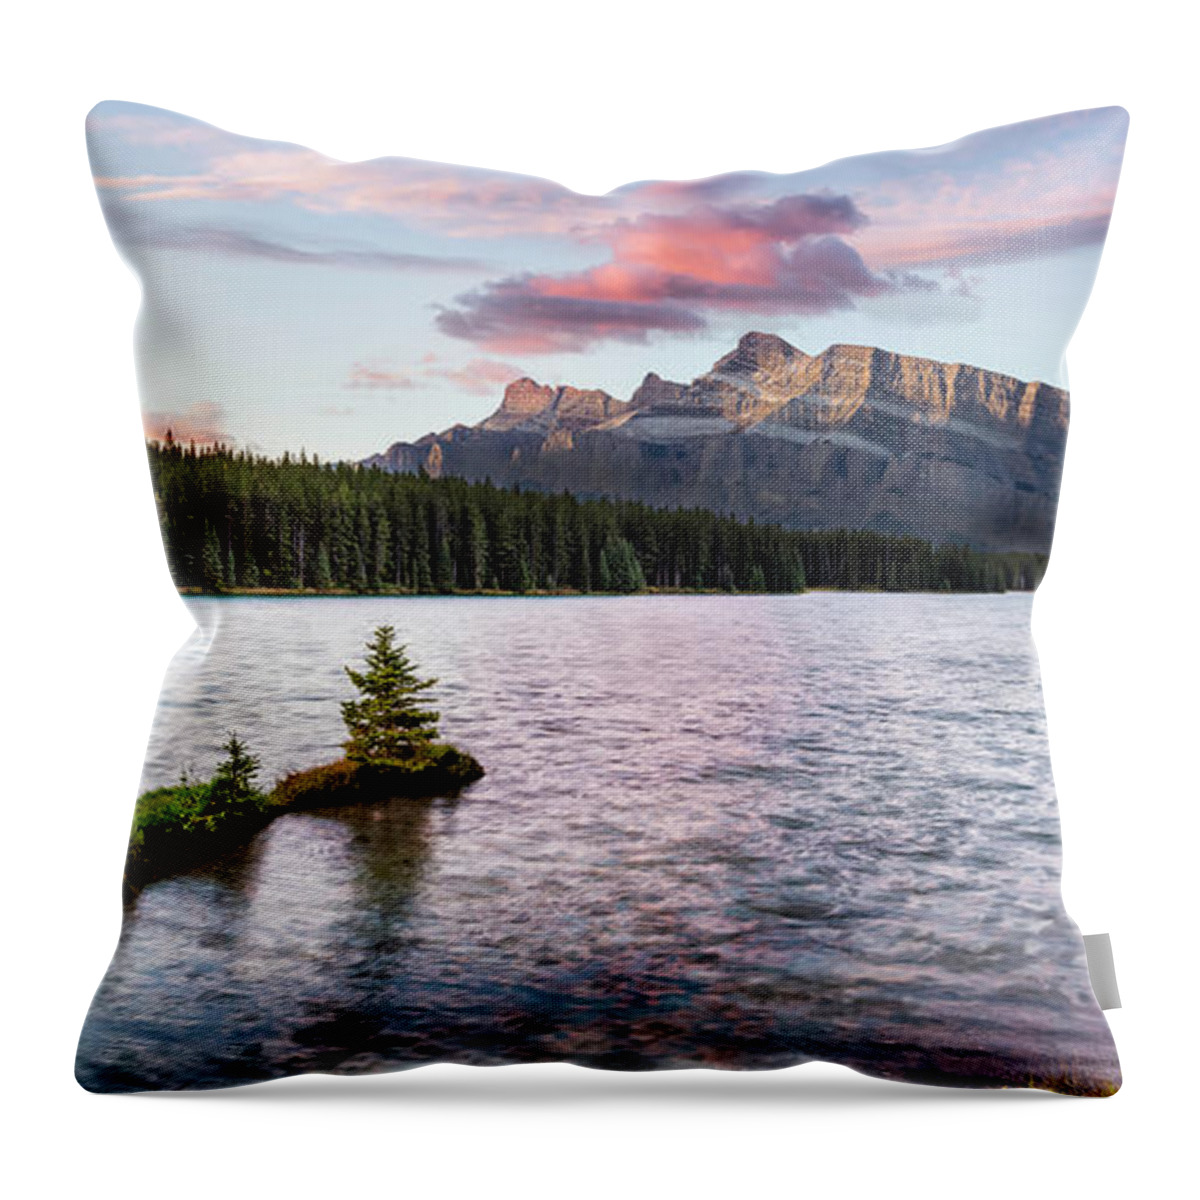 Mt-rundle Throw Pillow featuring the photograph Mt. Rundle- Alberta by Gary Johnson